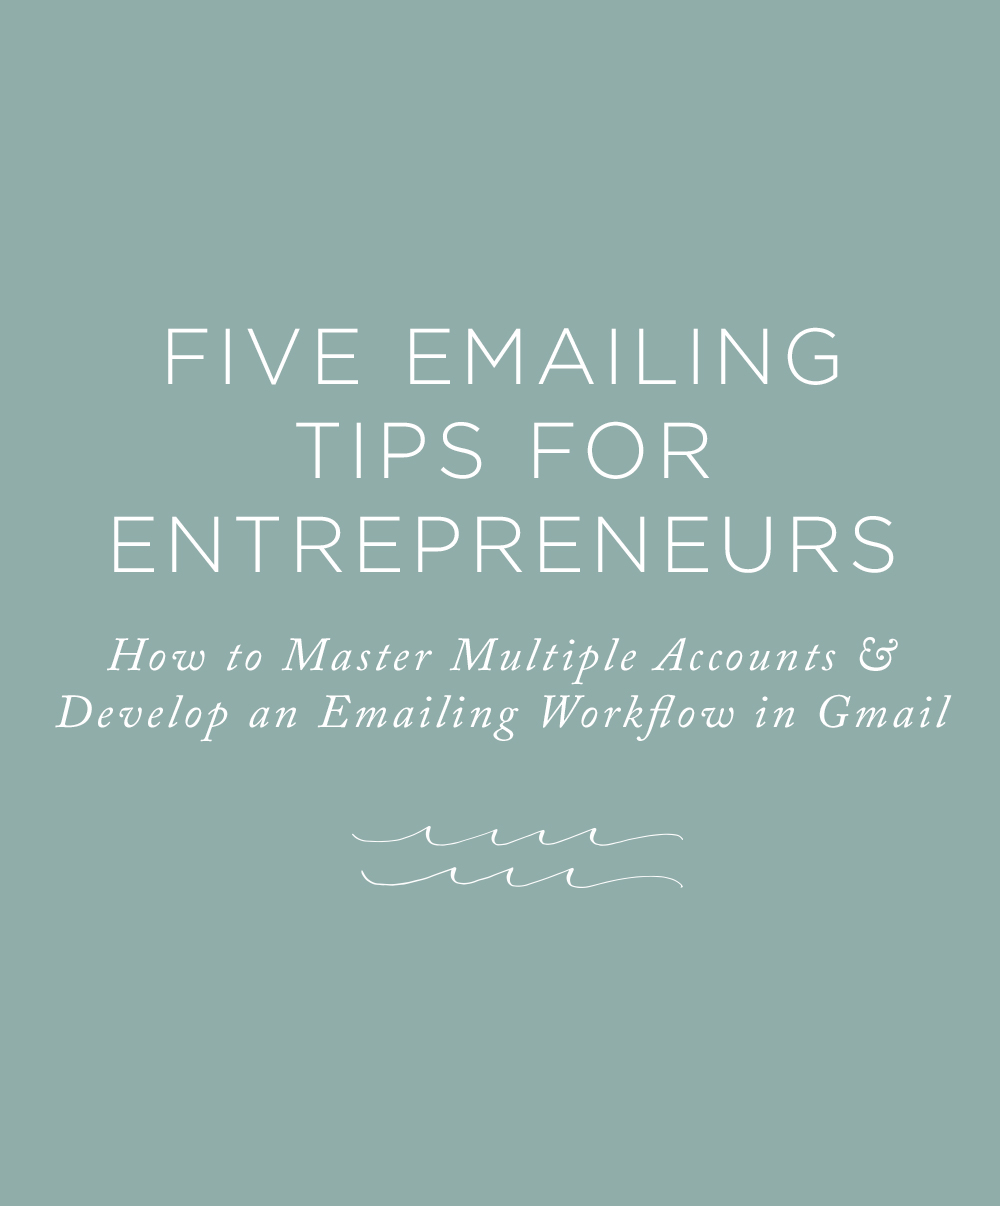 Emailing_Tips_Small_Business